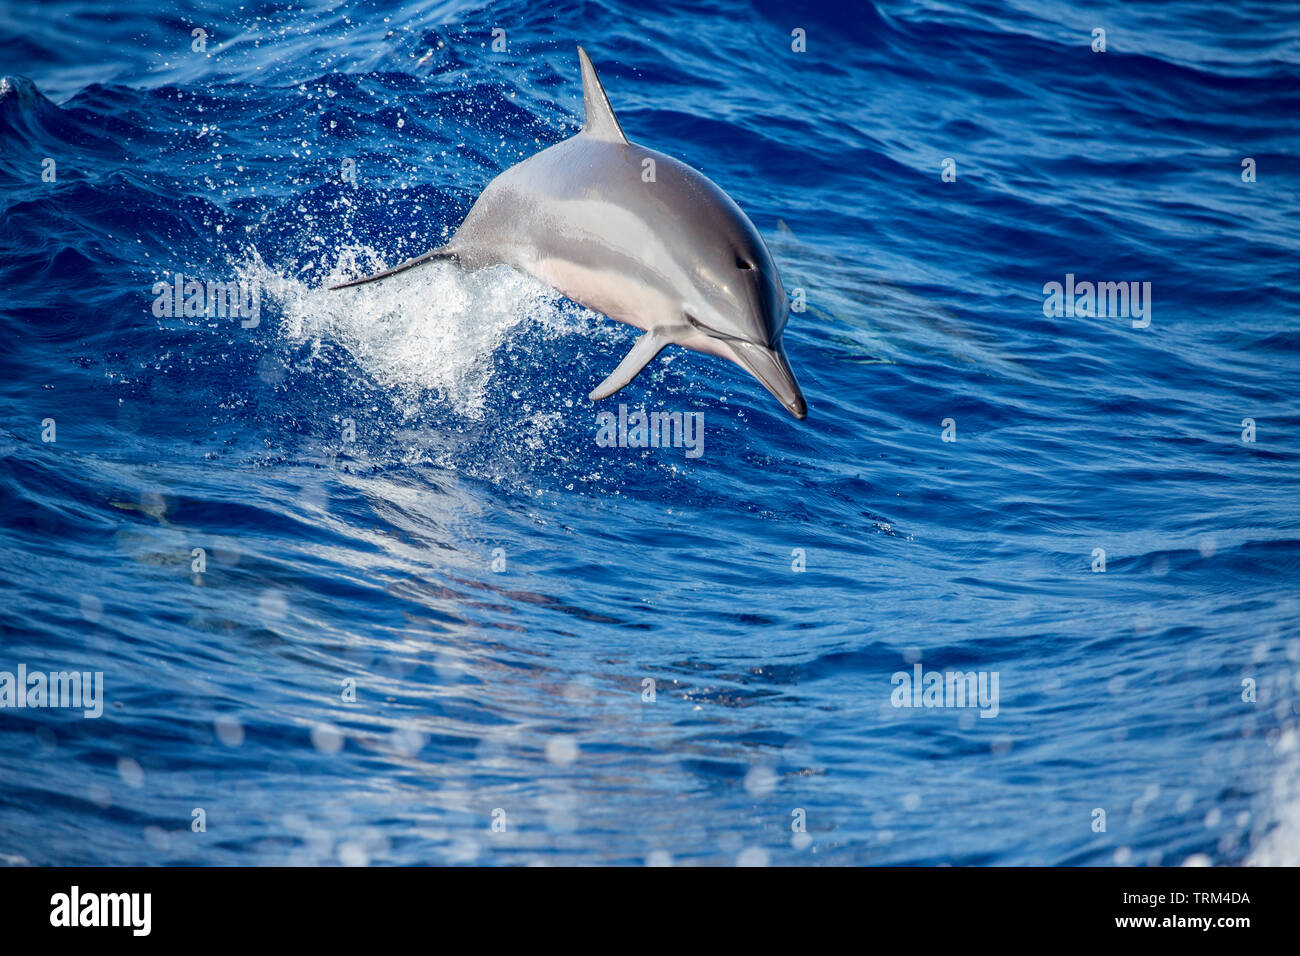 A spinner dolphin, Stenella longirostris, jumping out of the Pacific Ocean off the island of Lanai, Hawaii. Stock Photo